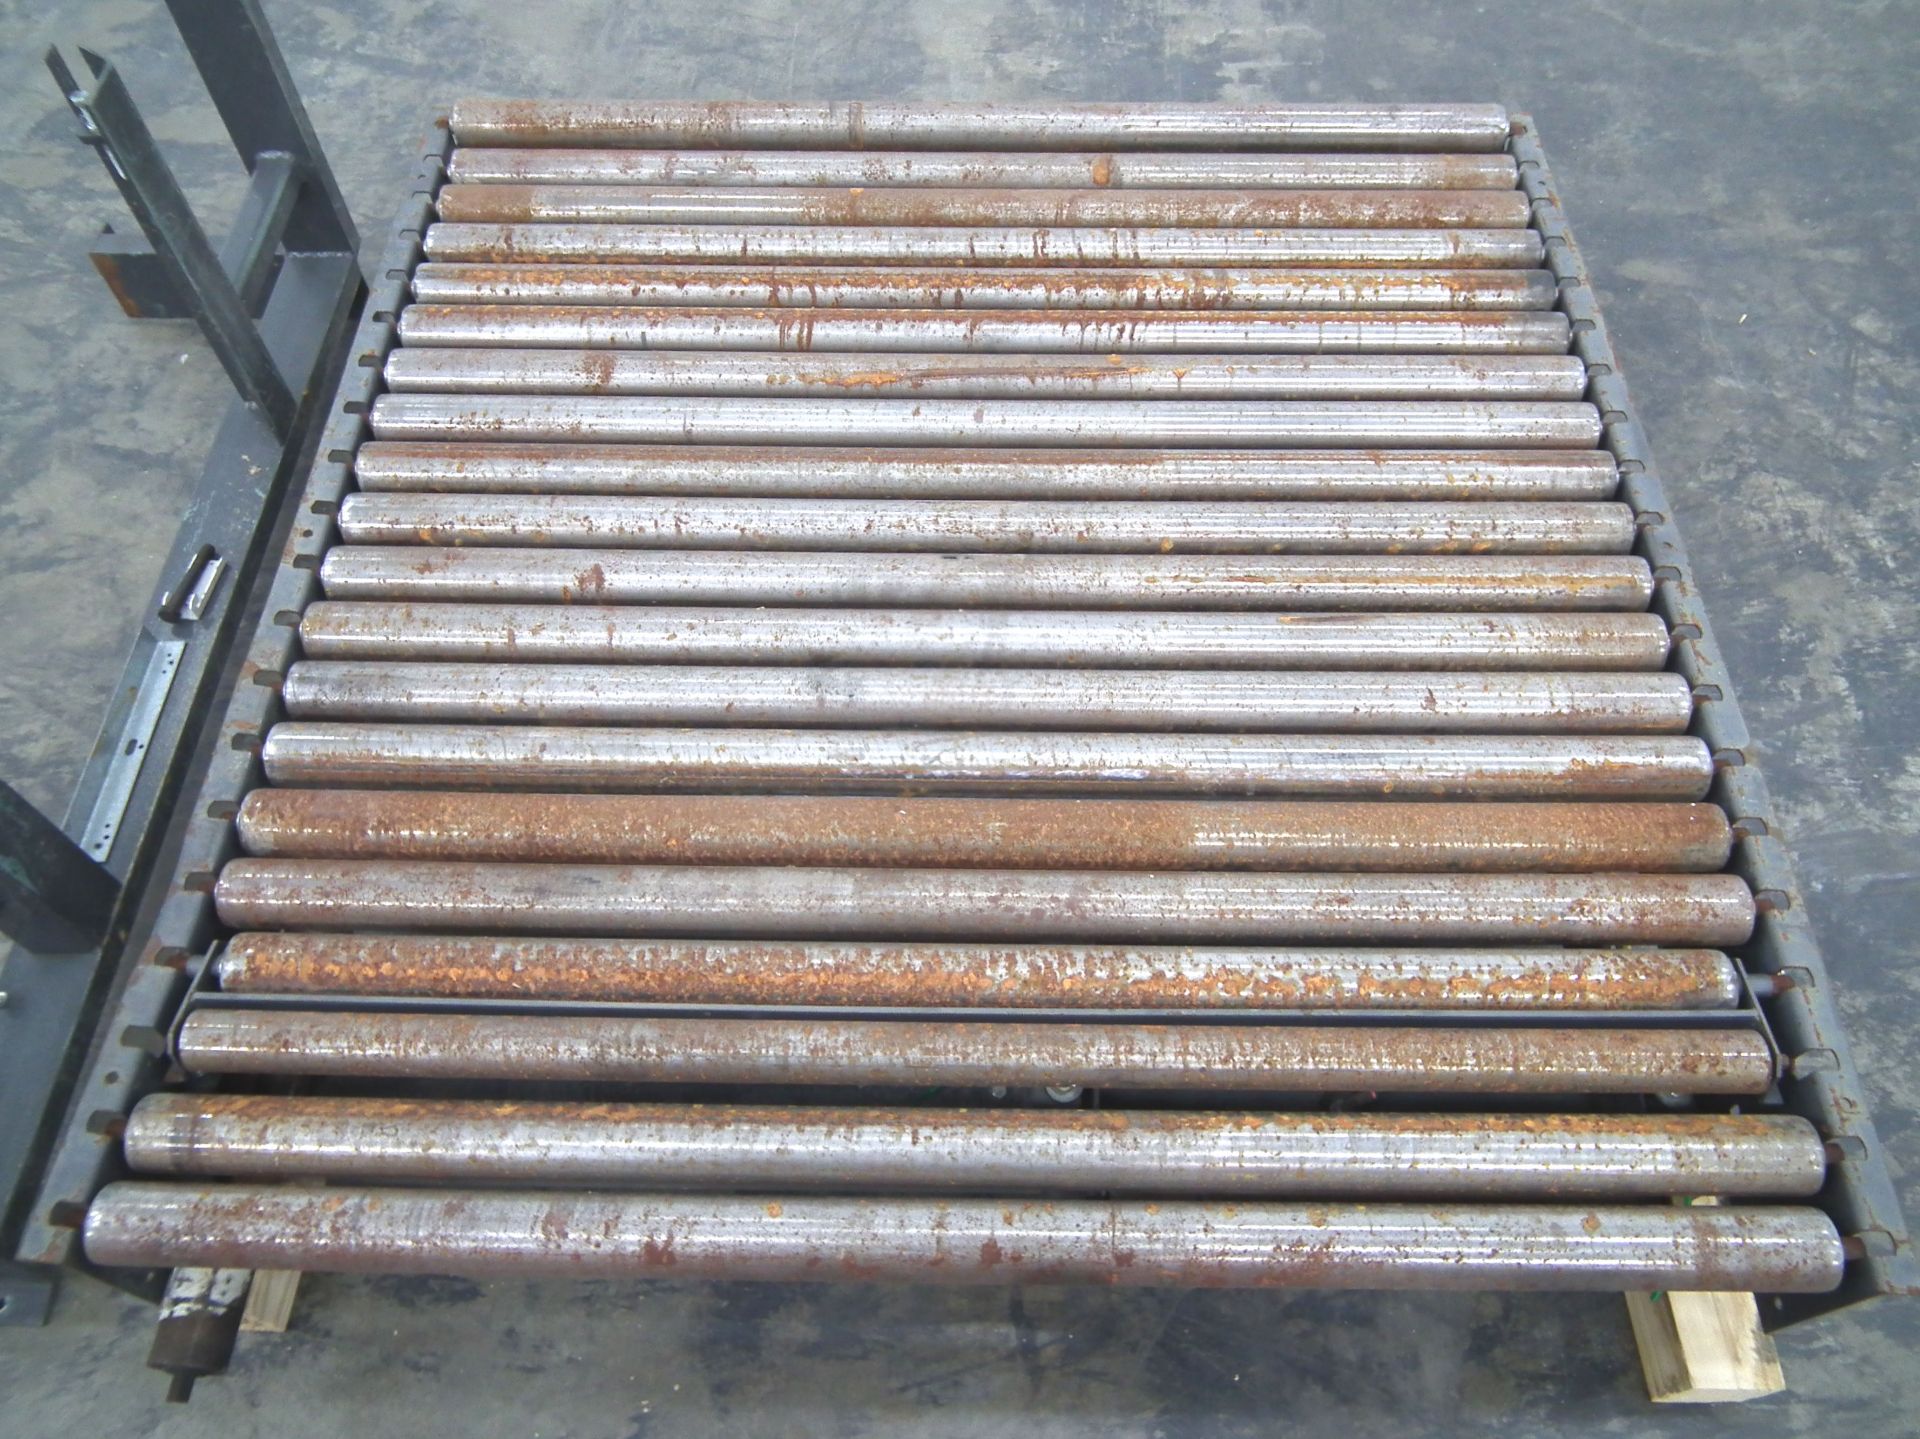 60" L x 60" W Gravity Rollers for Pallets A9926 - Image 5 of 5